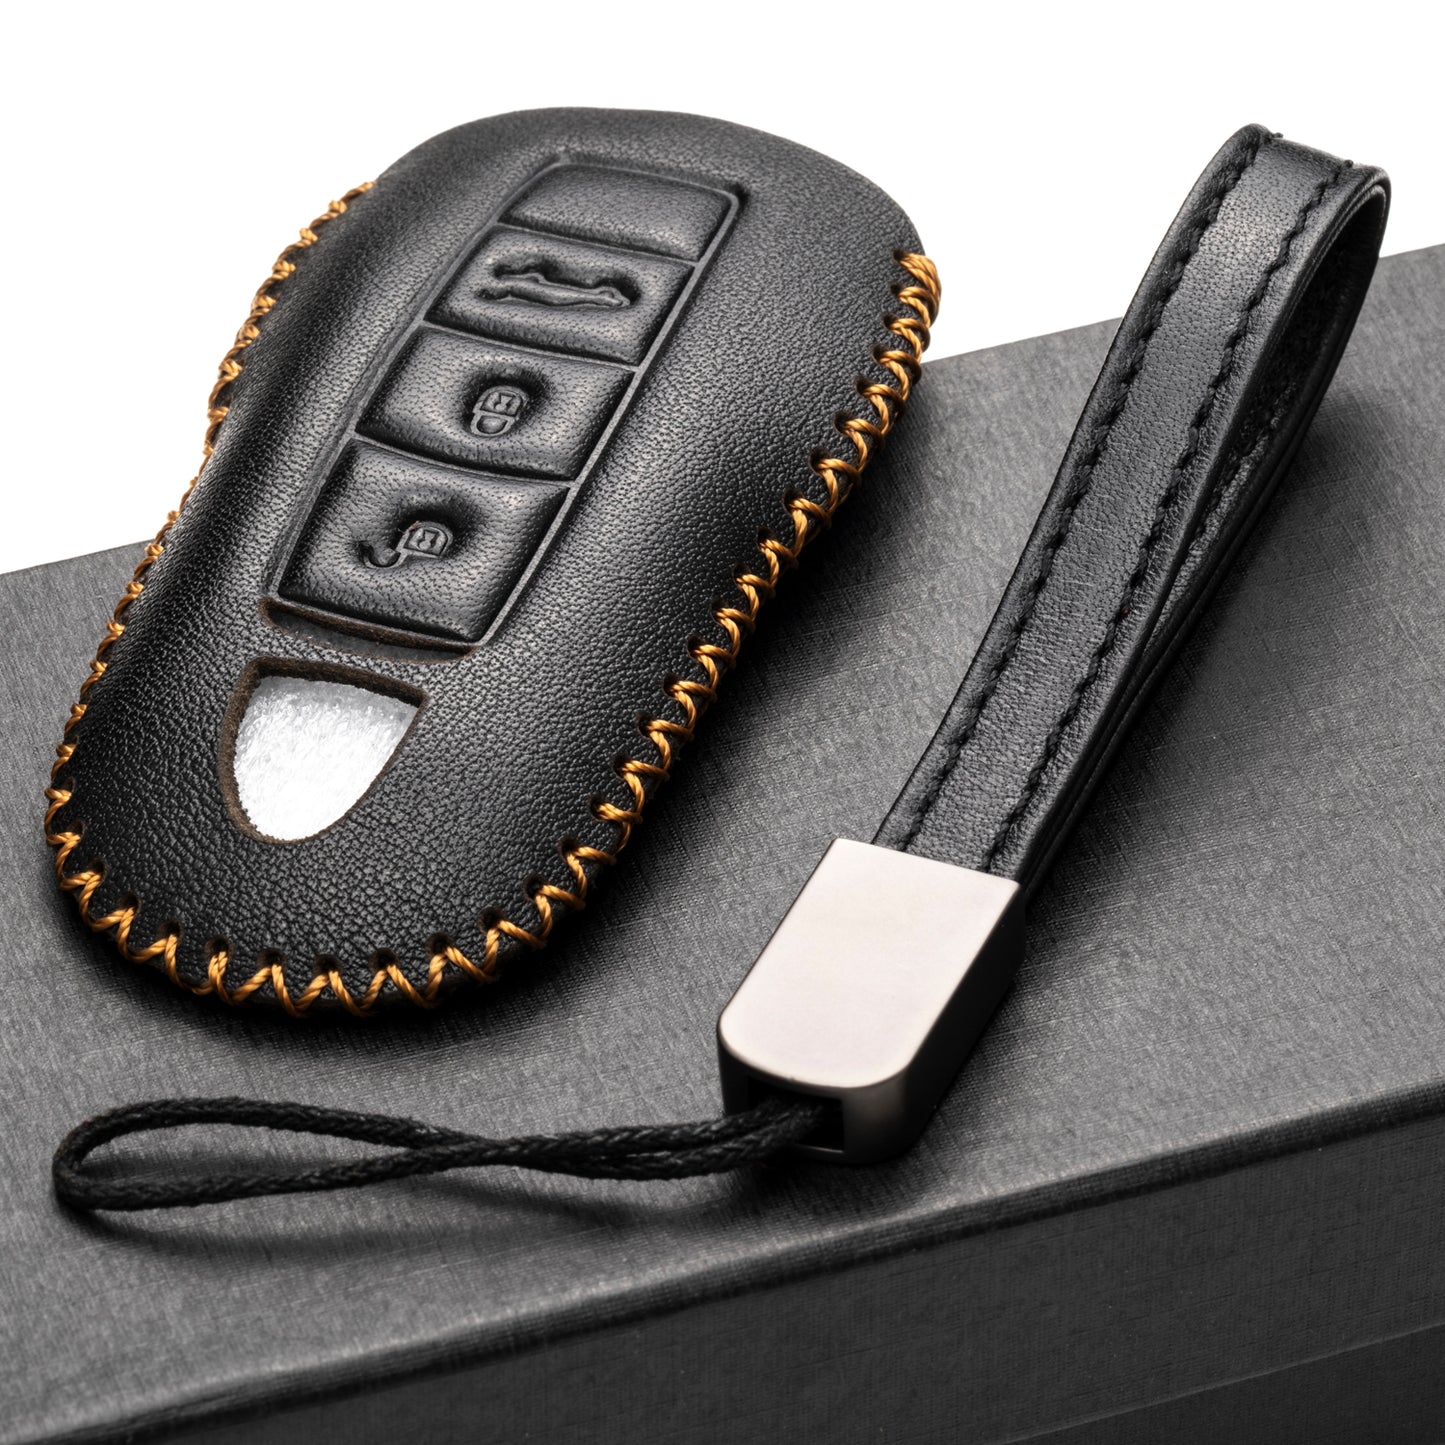 Vitodeco 3-Button Genuine Leather Smart Key Fob Case with Leather Key Strap Compatible for Porsche 718, Porsche 911, Porsche Panamera, Porsche Cayenne